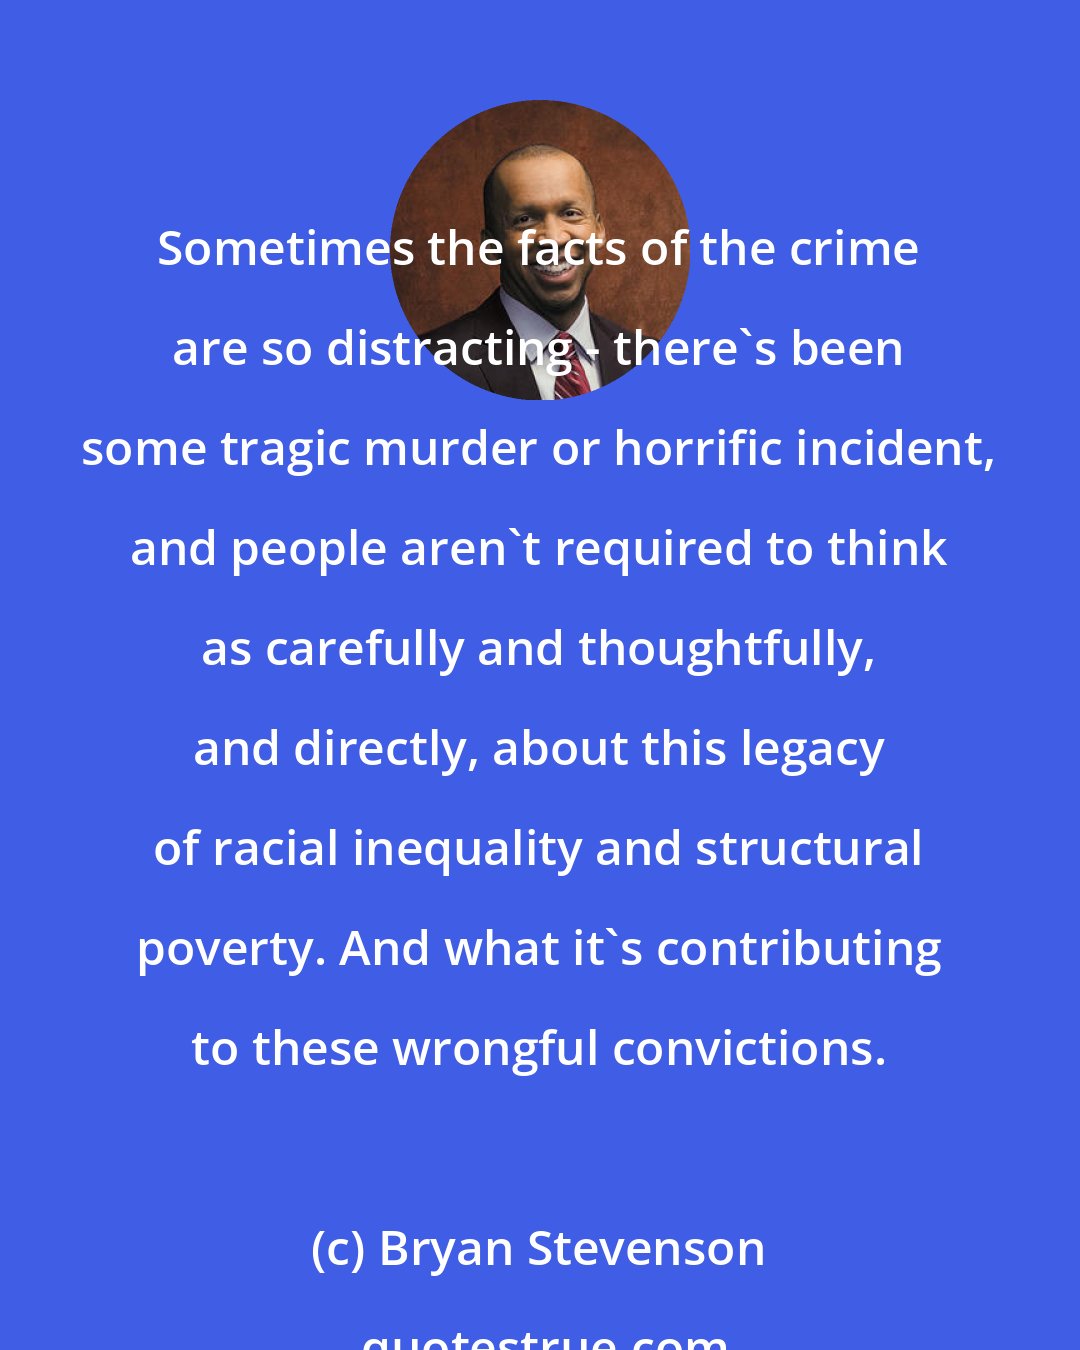 Bryan Stevenson: Sometimes the facts of the crime are so distracting - there's been some tragic murder or horrific incident, and people aren't required to think as carefully and thoughtfully, and directly, about this legacy of racial inequality and structural poverty. And what it's contributing to these wrongful convictions.